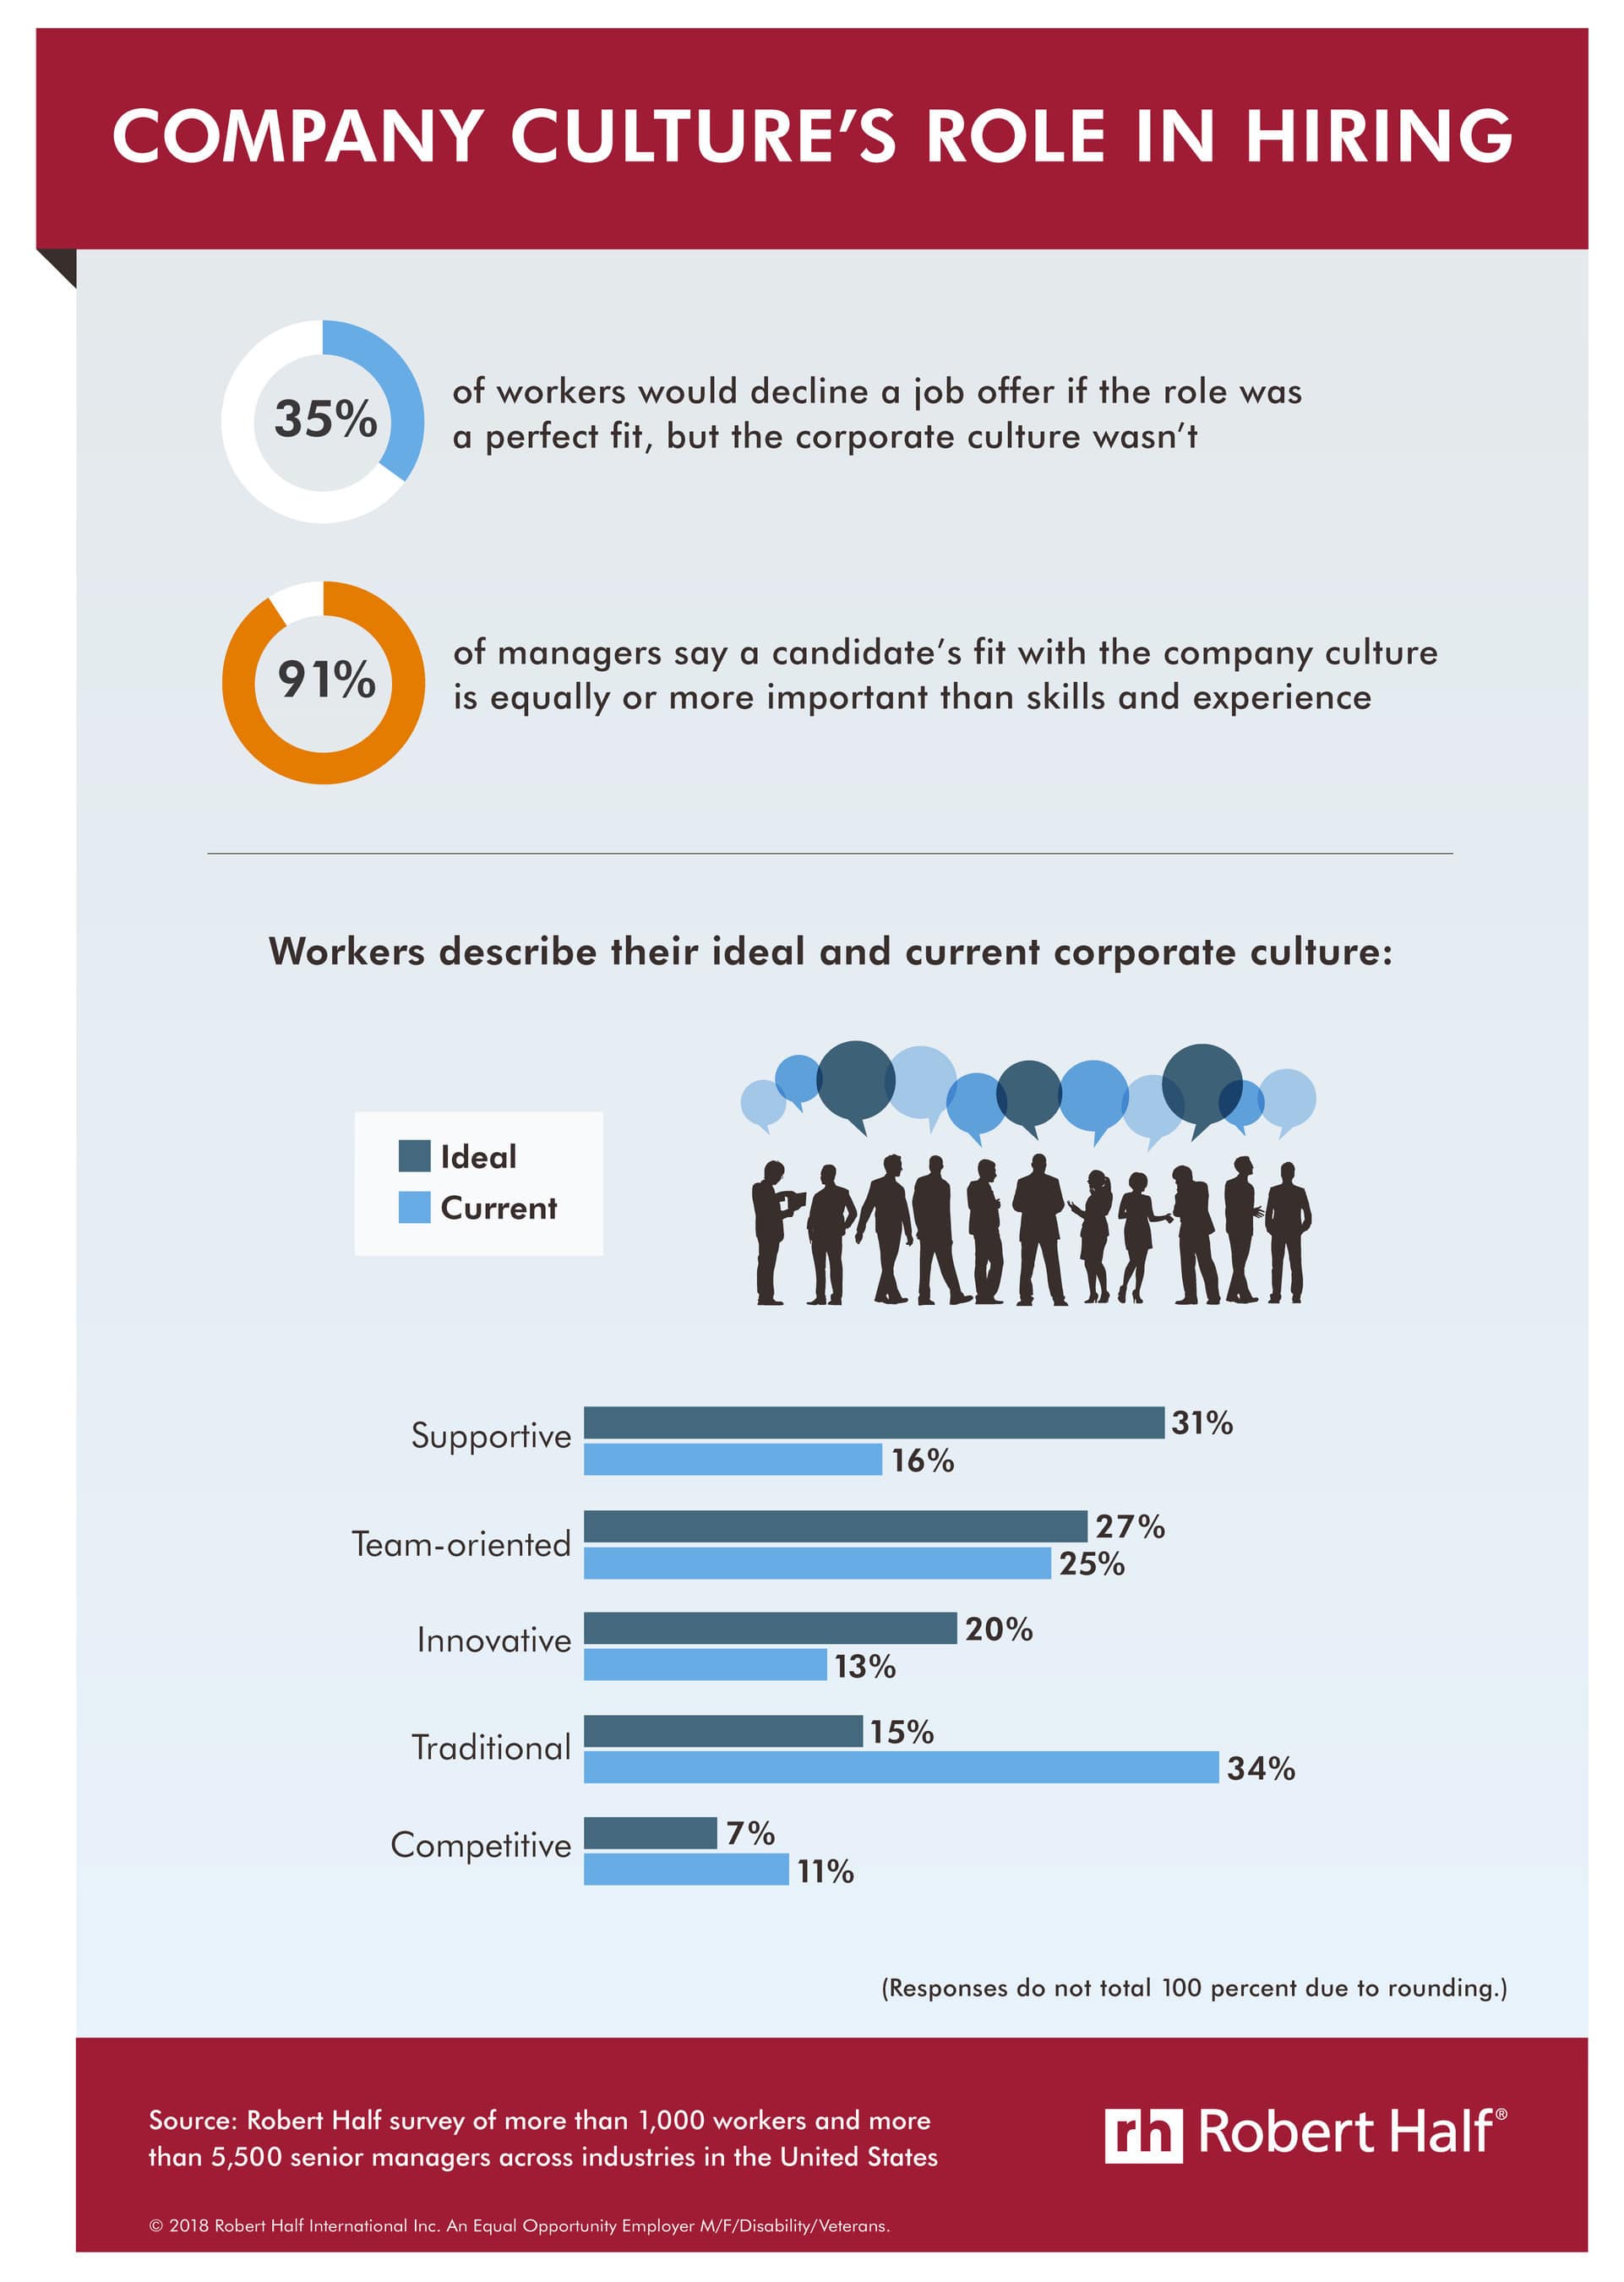 Both job seekers and employers place importance on corporate culture fit.